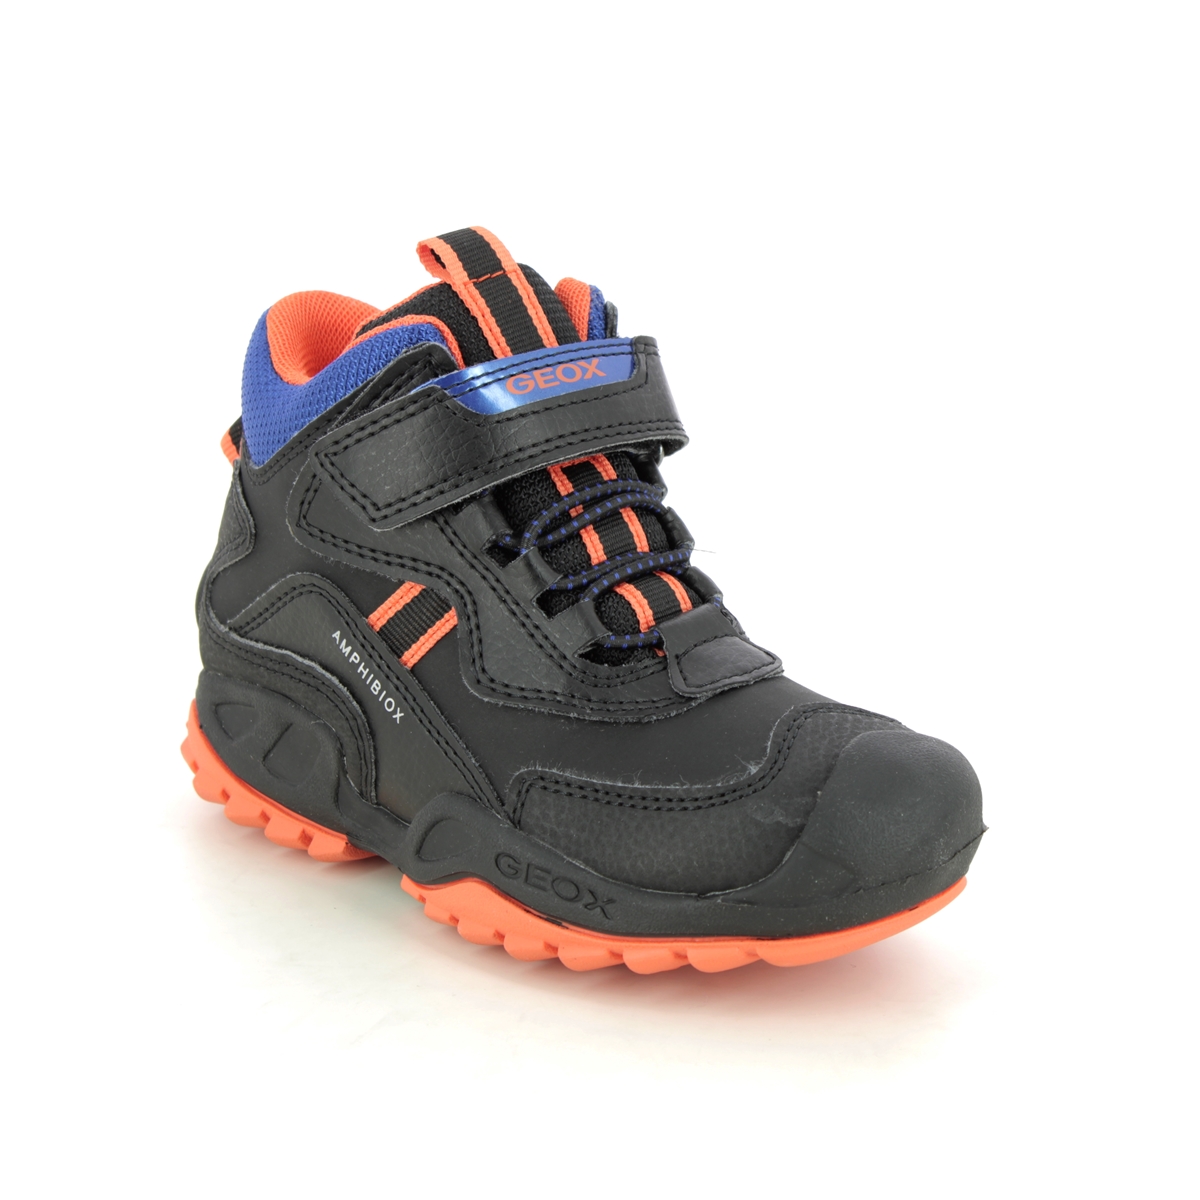 Geox - Savage Boot Tex (Black) J261Wb-C0399 In Size 32 In Plain Black For School For kids